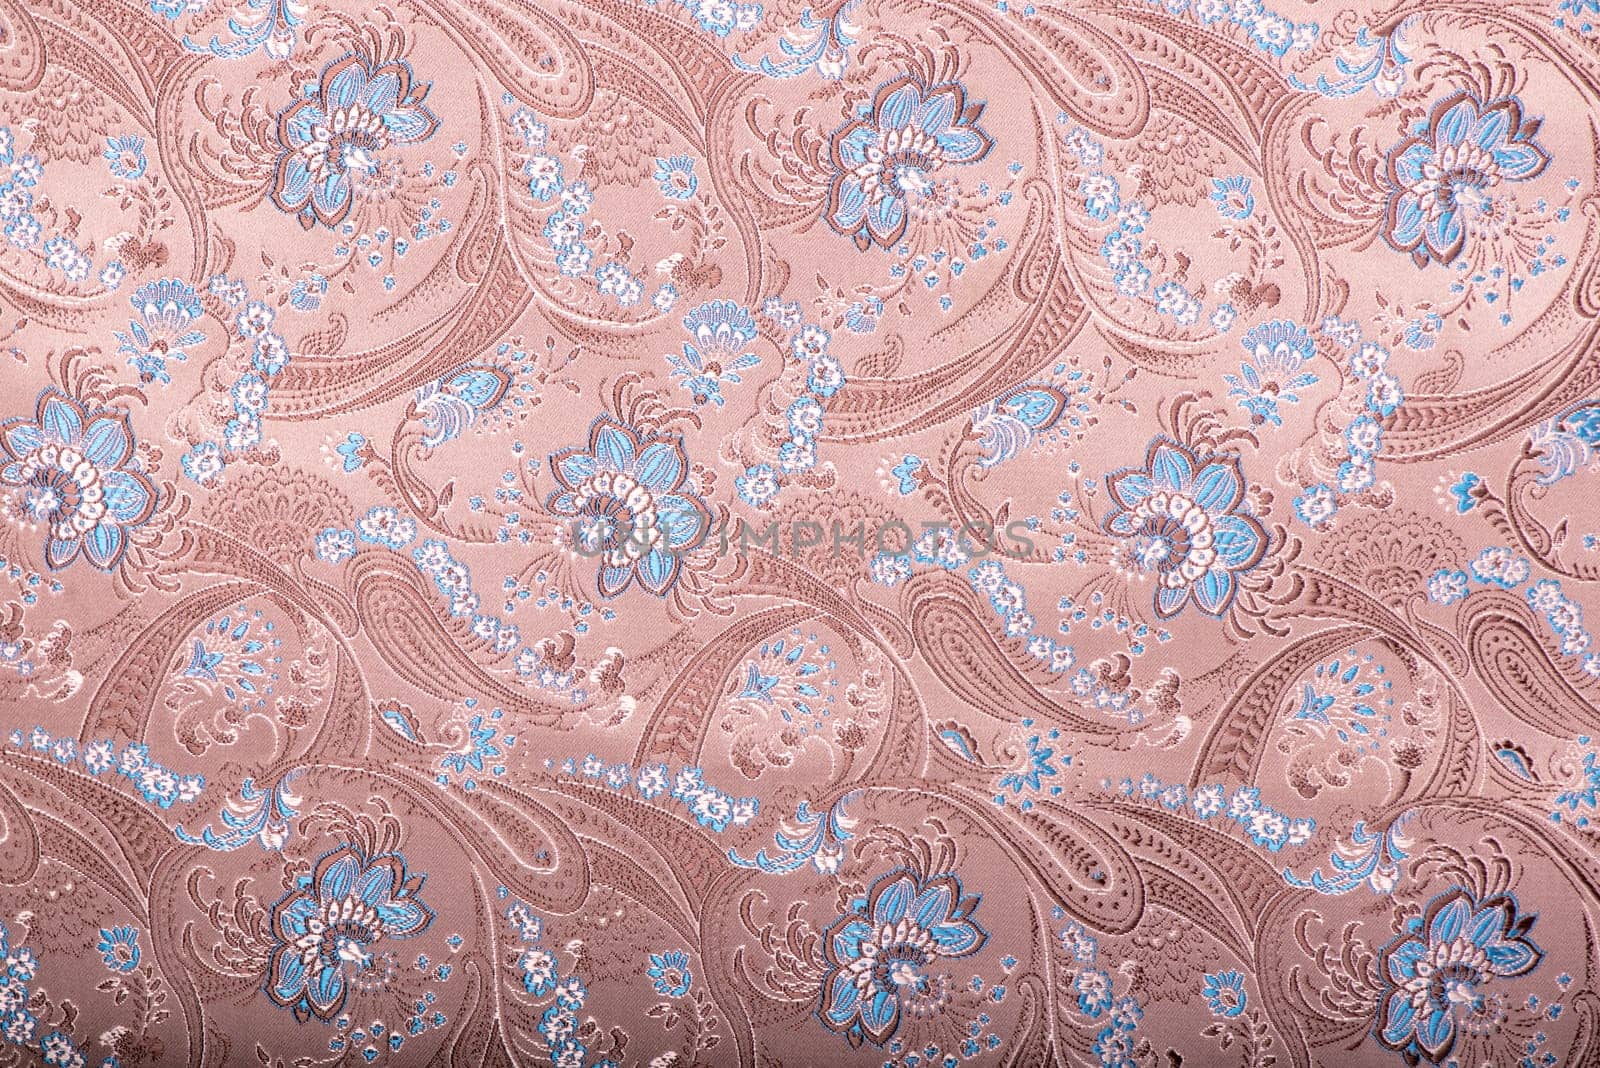 Beautiful pattern with ornament from embroidered blue flowers. Fashion design. mbroidered pattern background with ornamental flowers on pink background.